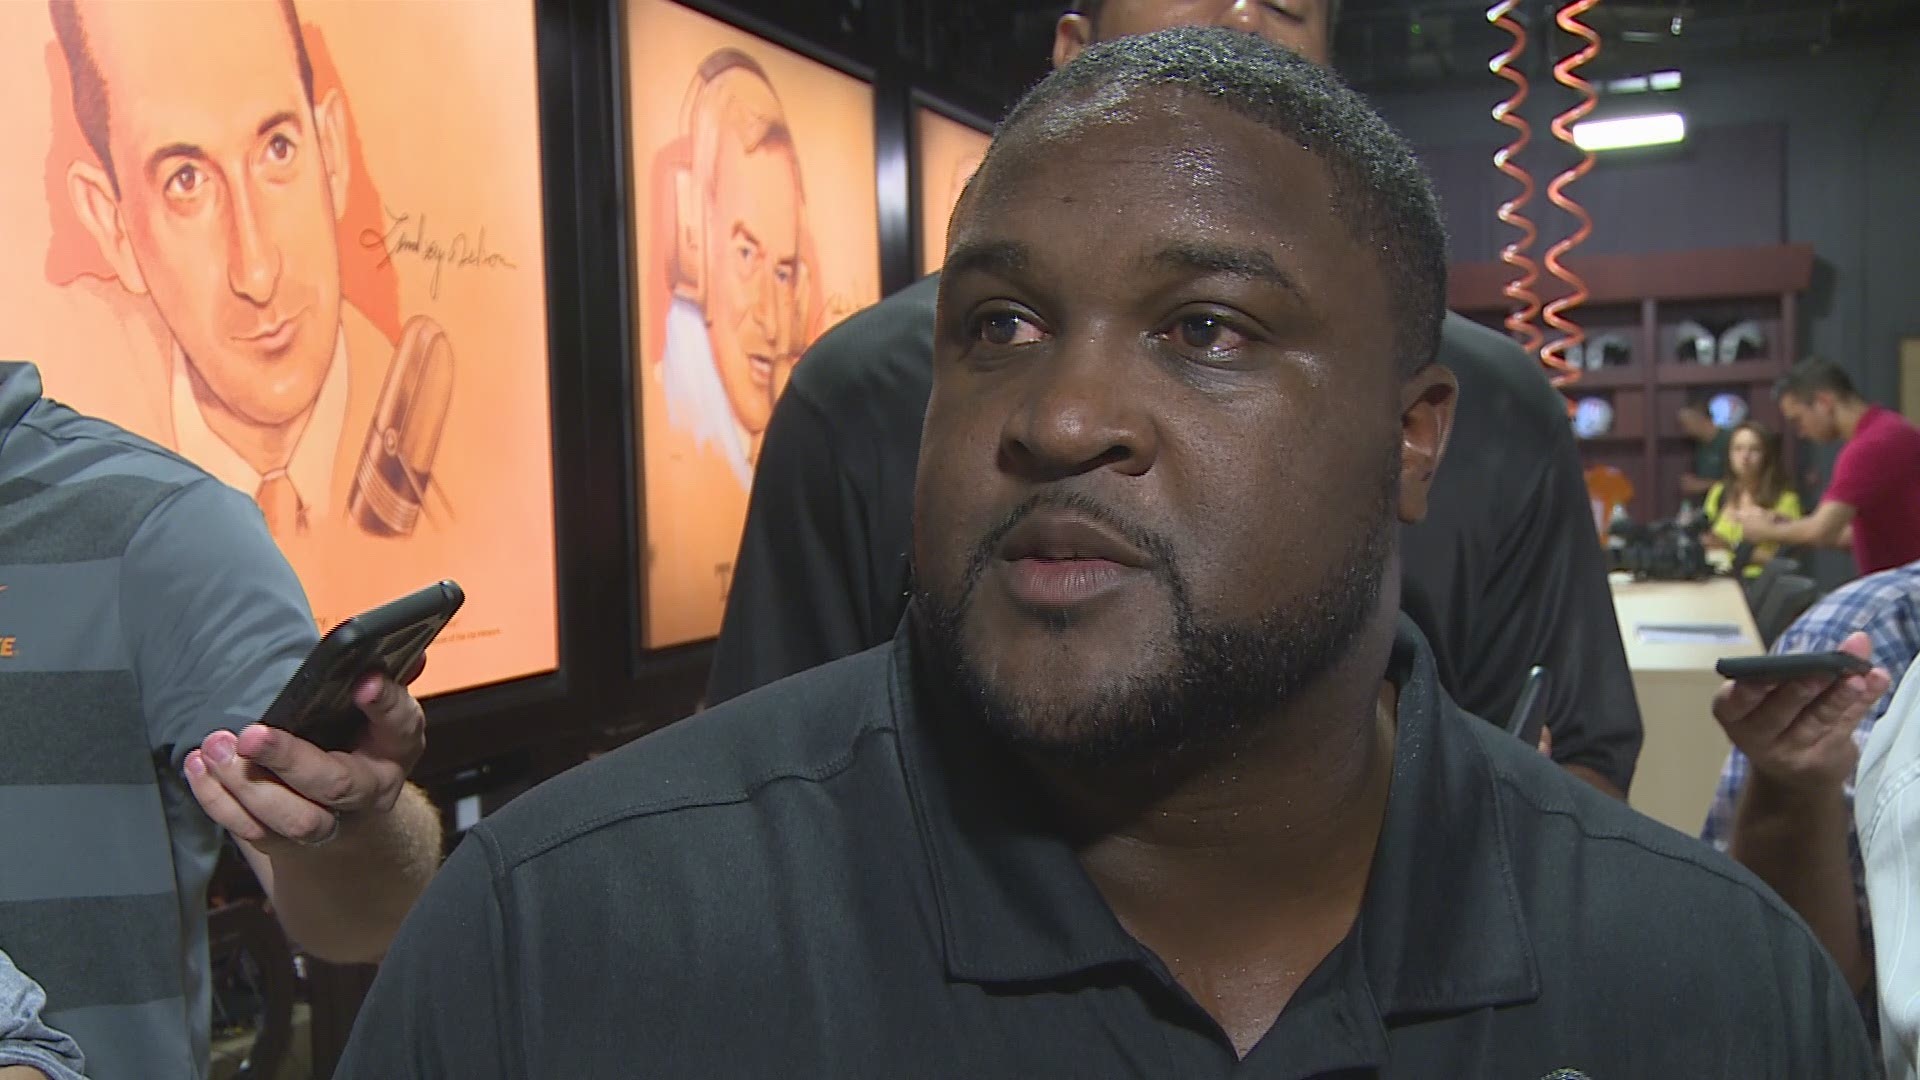 Tee Martin is beginning his first season as Tennessee's wide receivers coach and he thinks Marquez Callaway can set himself up to be a high-round NFL draft pick.